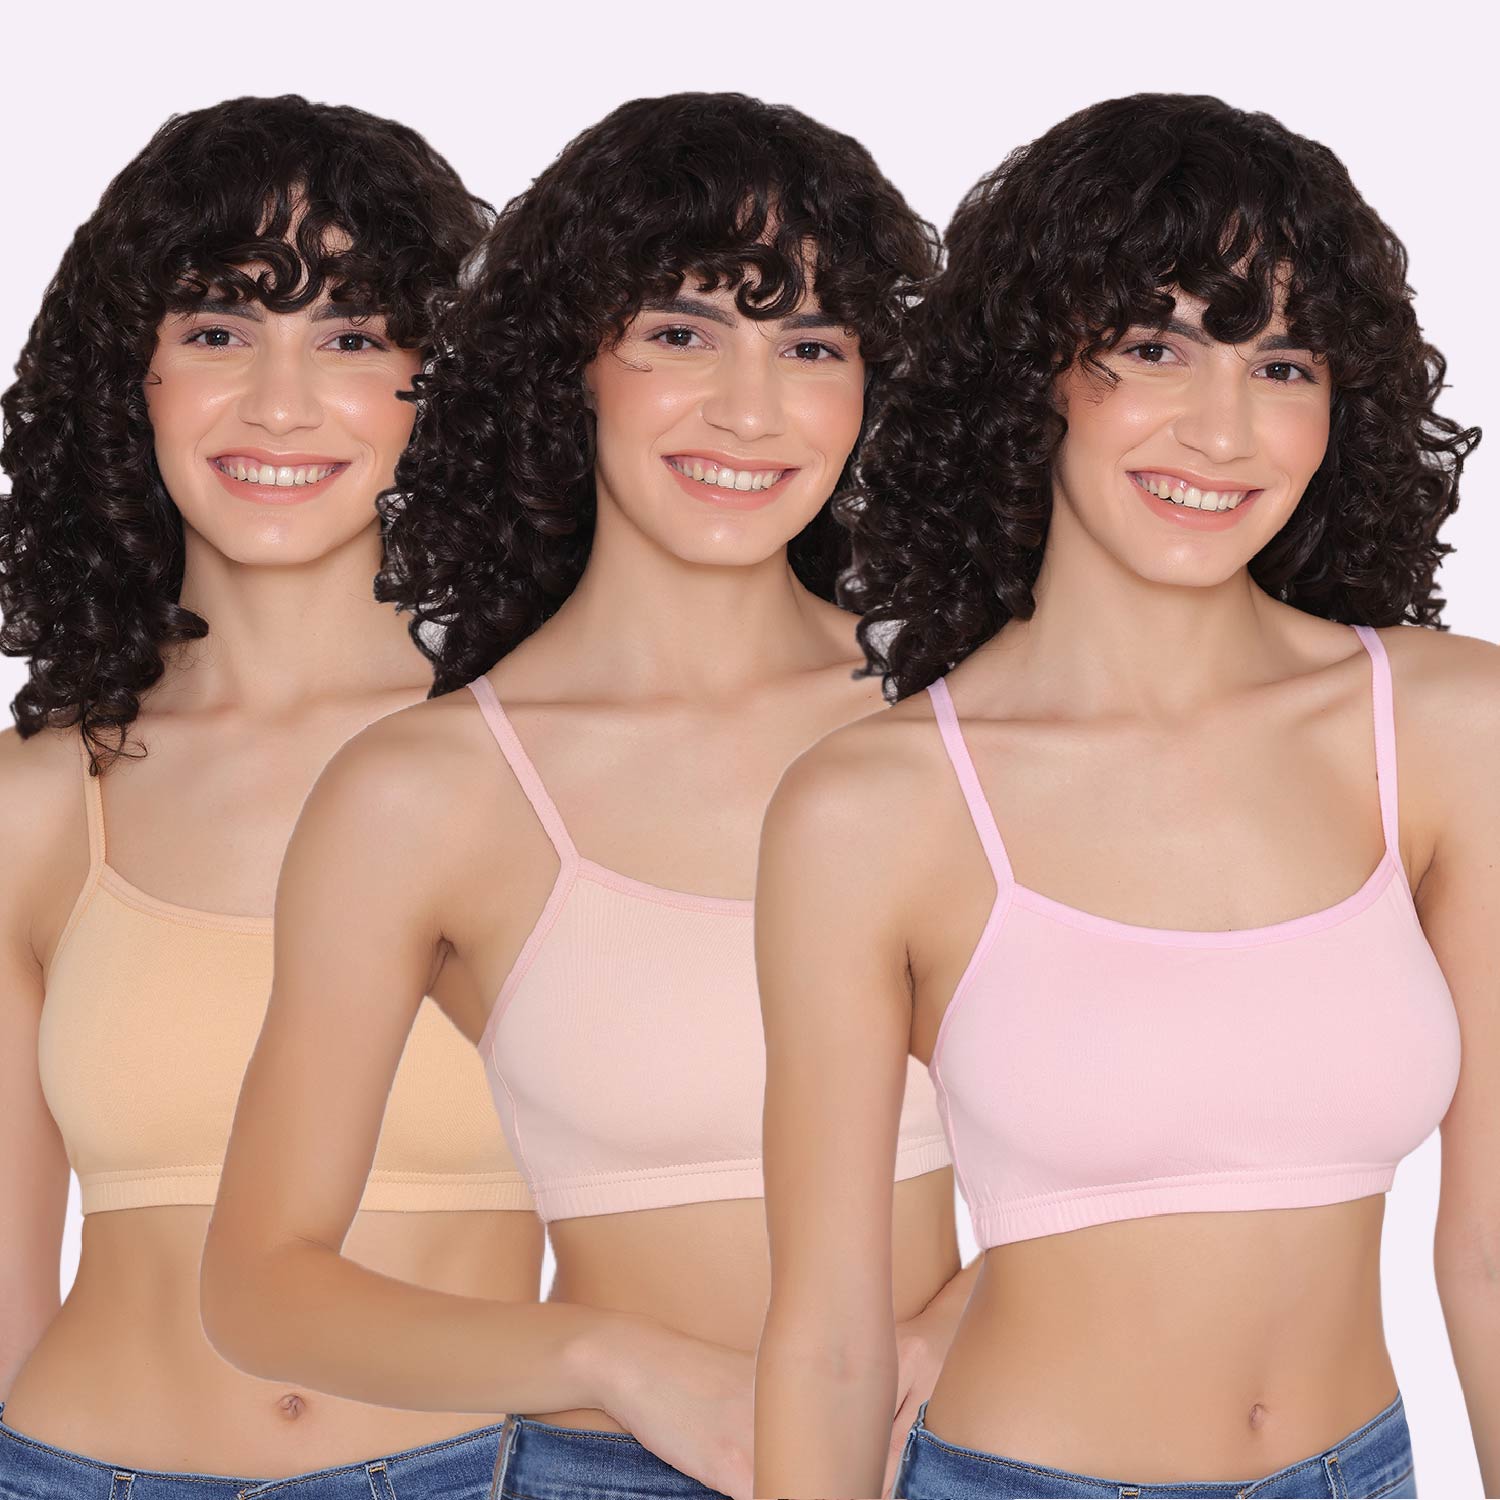 Pack Of 6 Cotton Bra With Lycra Straps For Teenagers & Women – Pink - Teenager  Bra